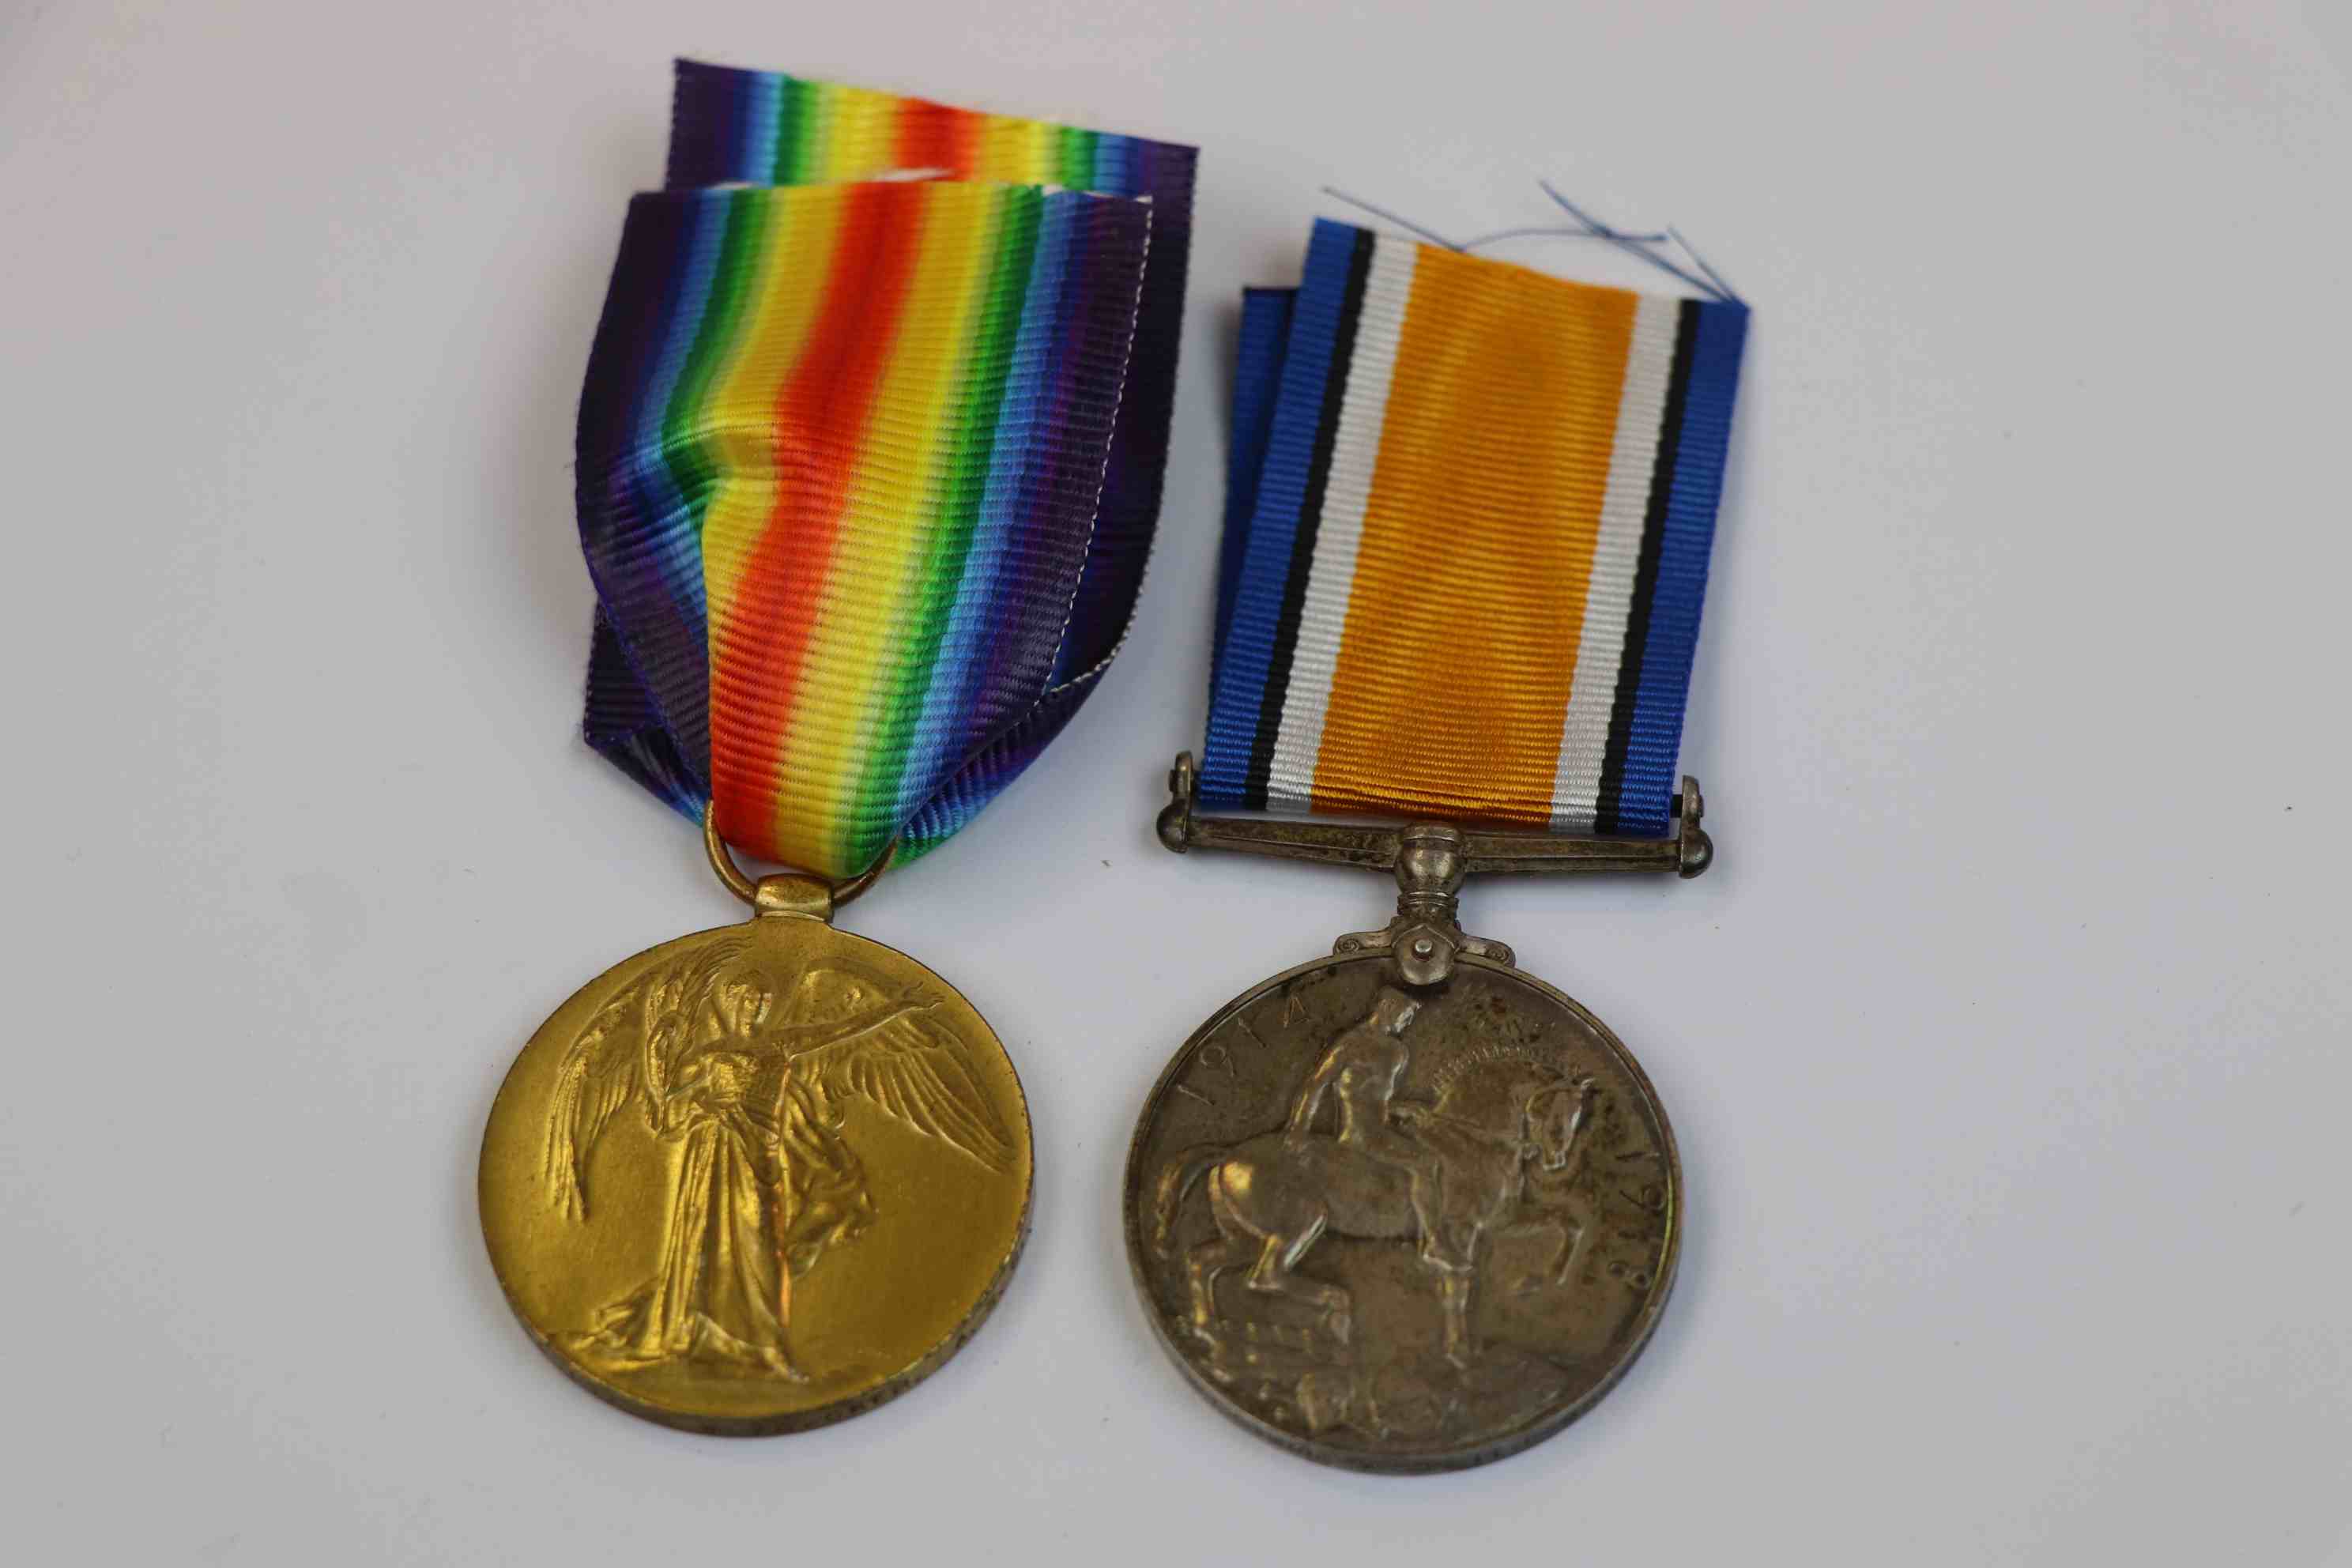 A Full Size World War One / WW1 Medal Pair To Include The Victory Medal And The British War Medal